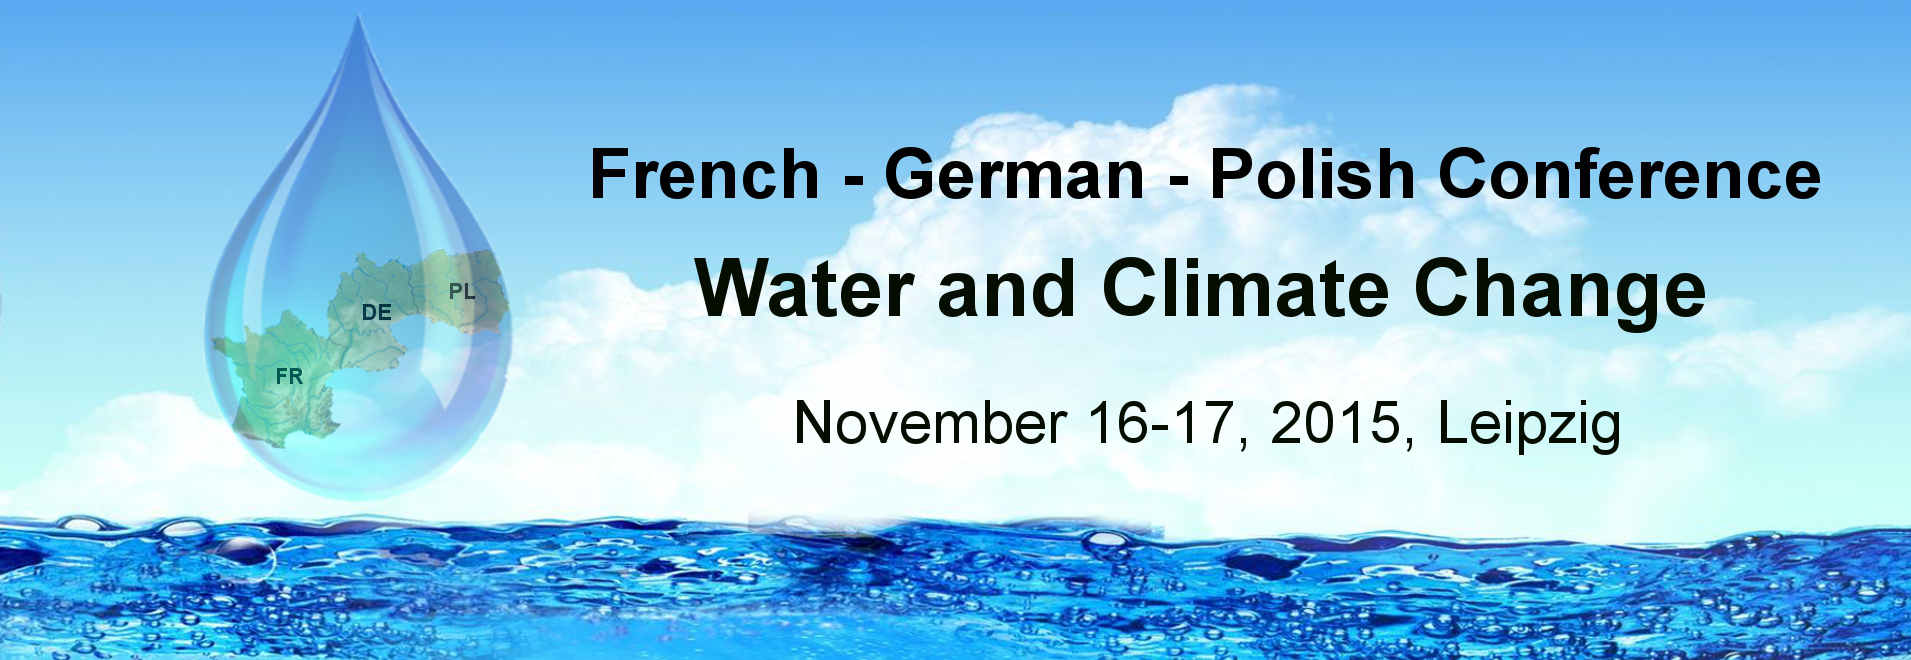 Water and Climate Change Conference